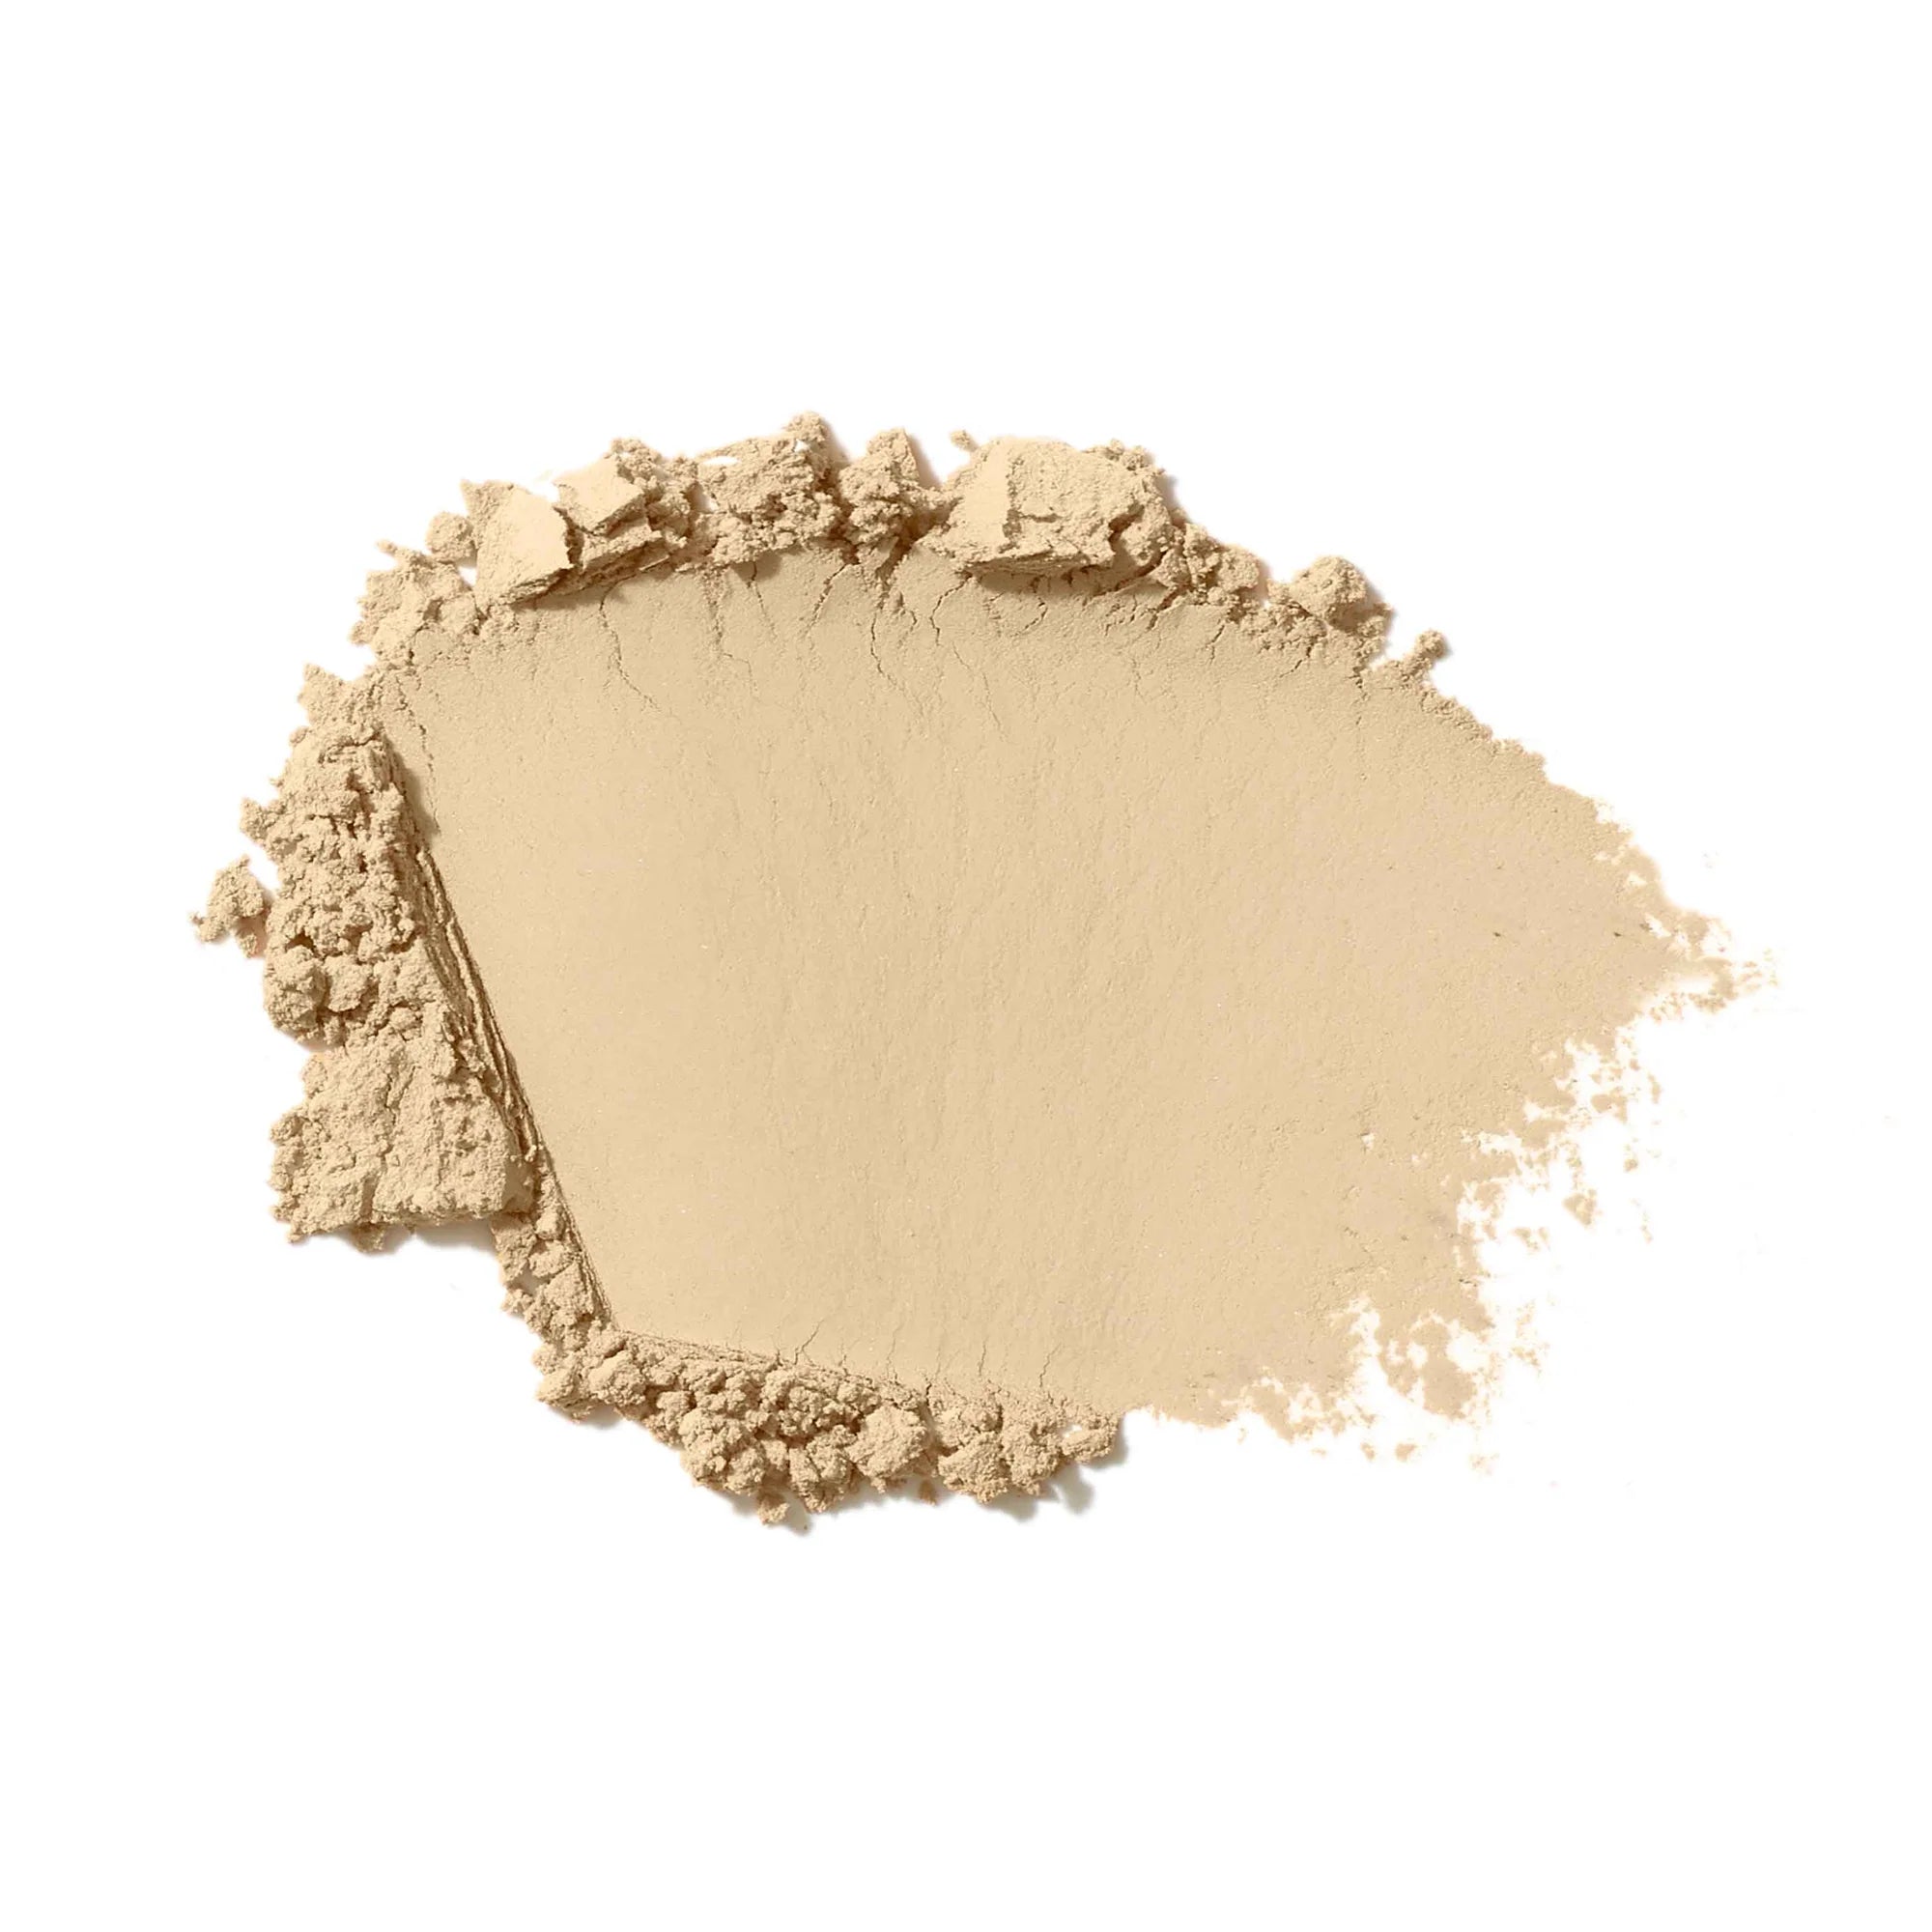 Jane Iredale's PurePressed® Base Mineral Foundation - shade Warm Sienna - medium light with strong gold undertones